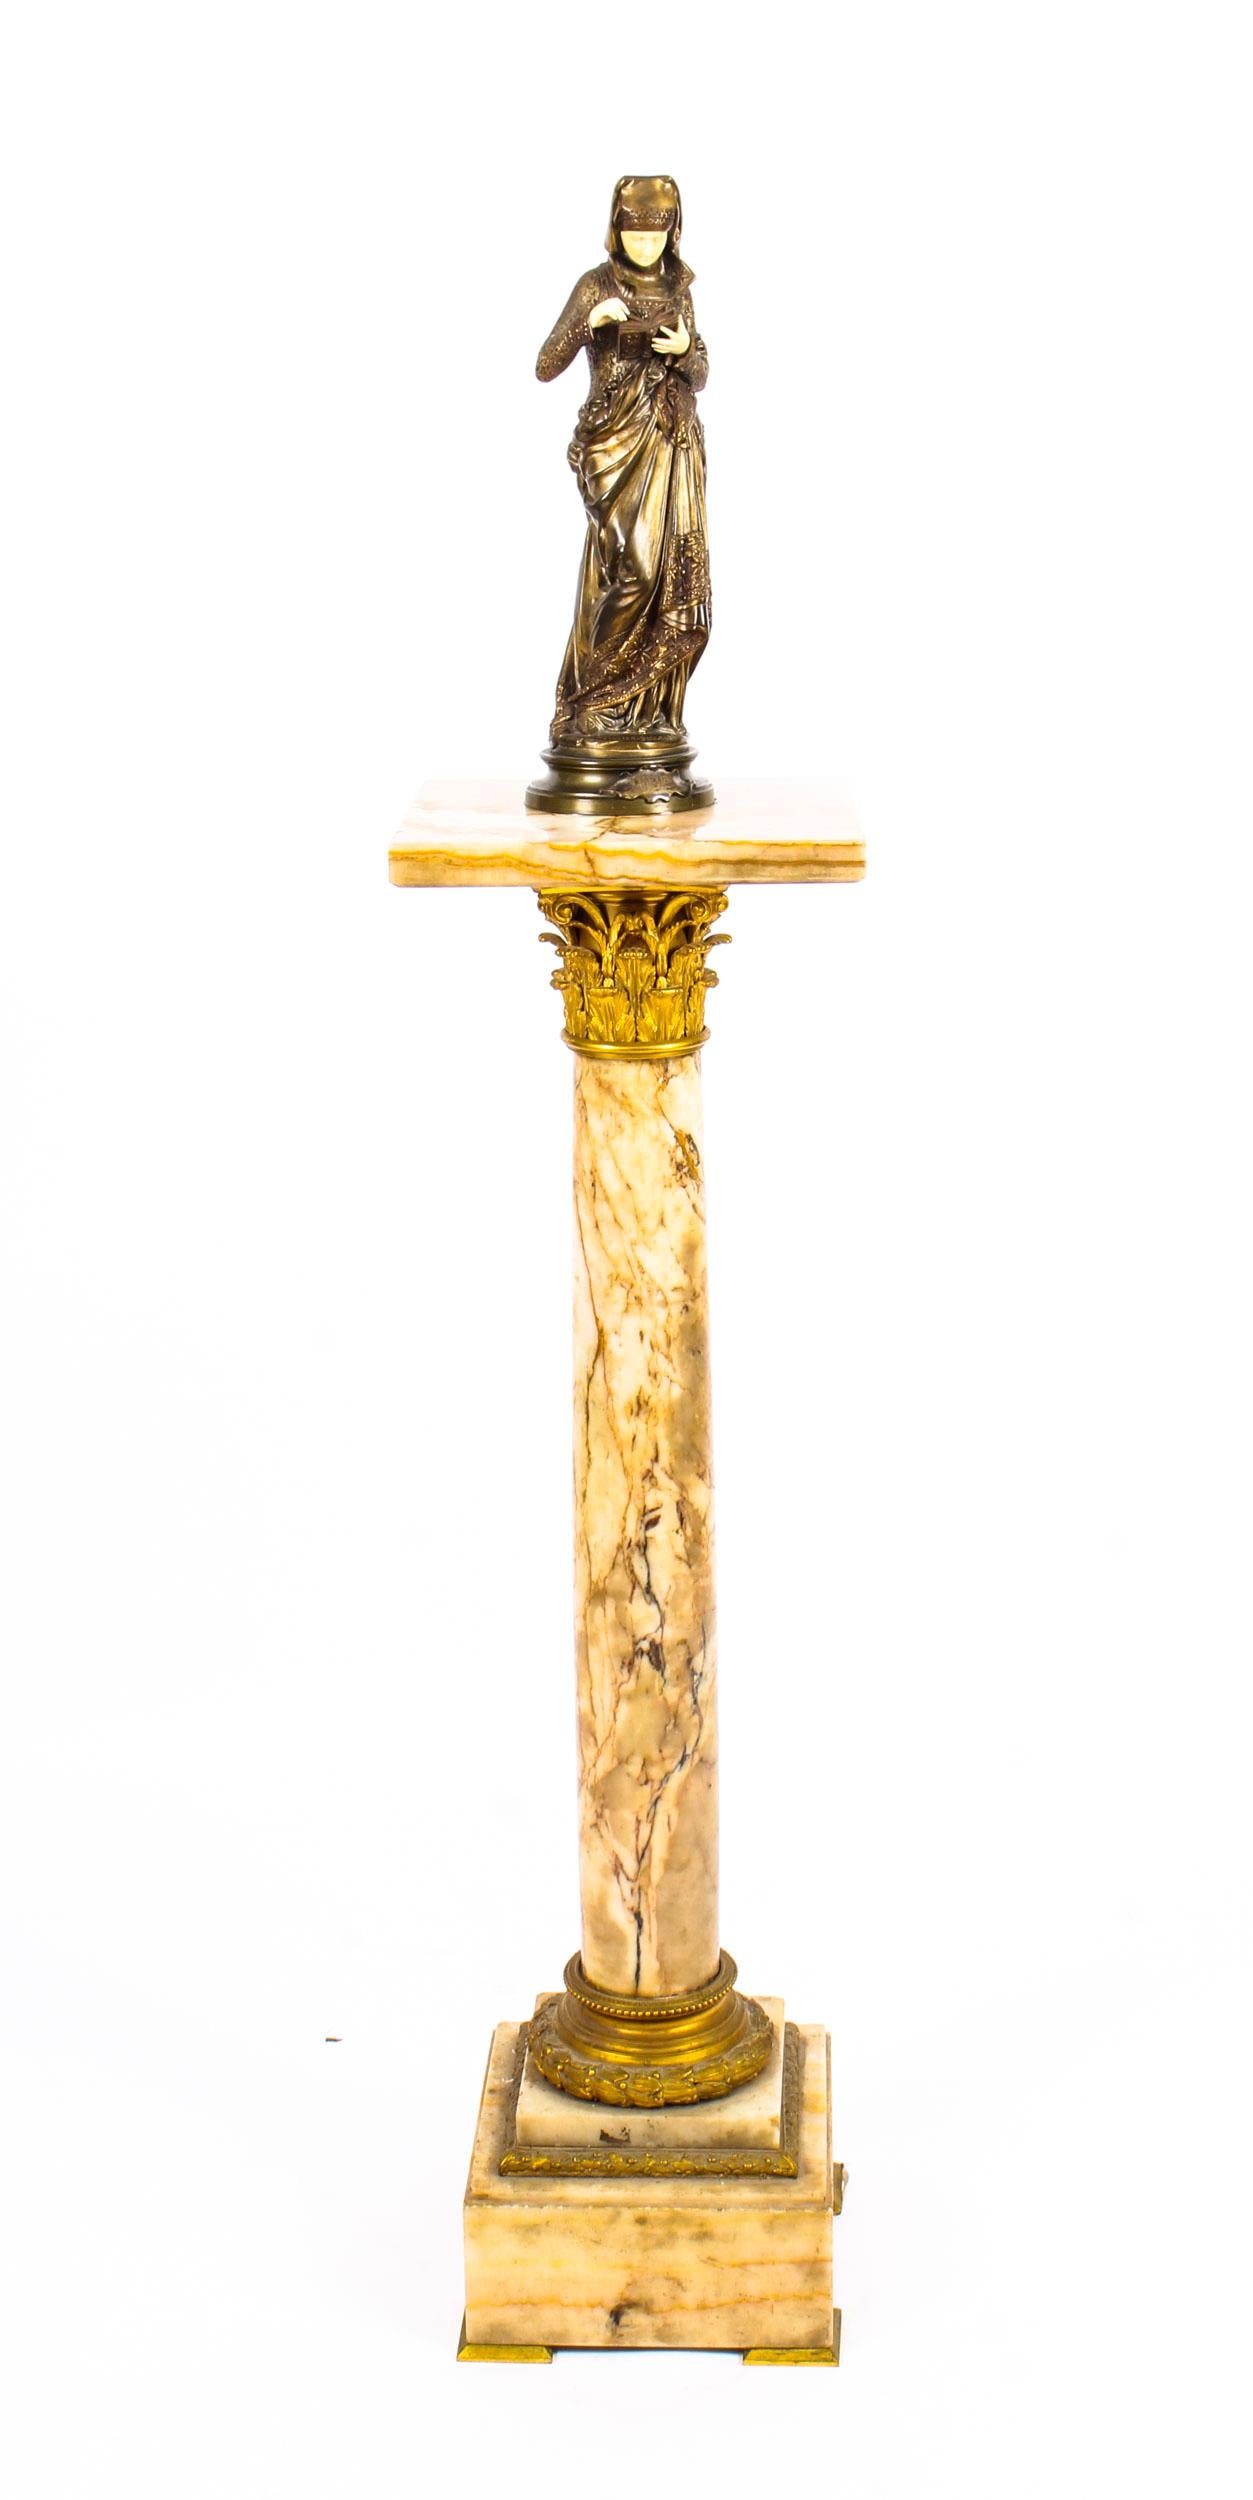 This is a splendid antique French Louis XVI Revival alabaster torchere, late 19th century in date.

This majestic torchere has a splendid square platform top which is raised on an elegantly turned column support with circular socle and a stepped